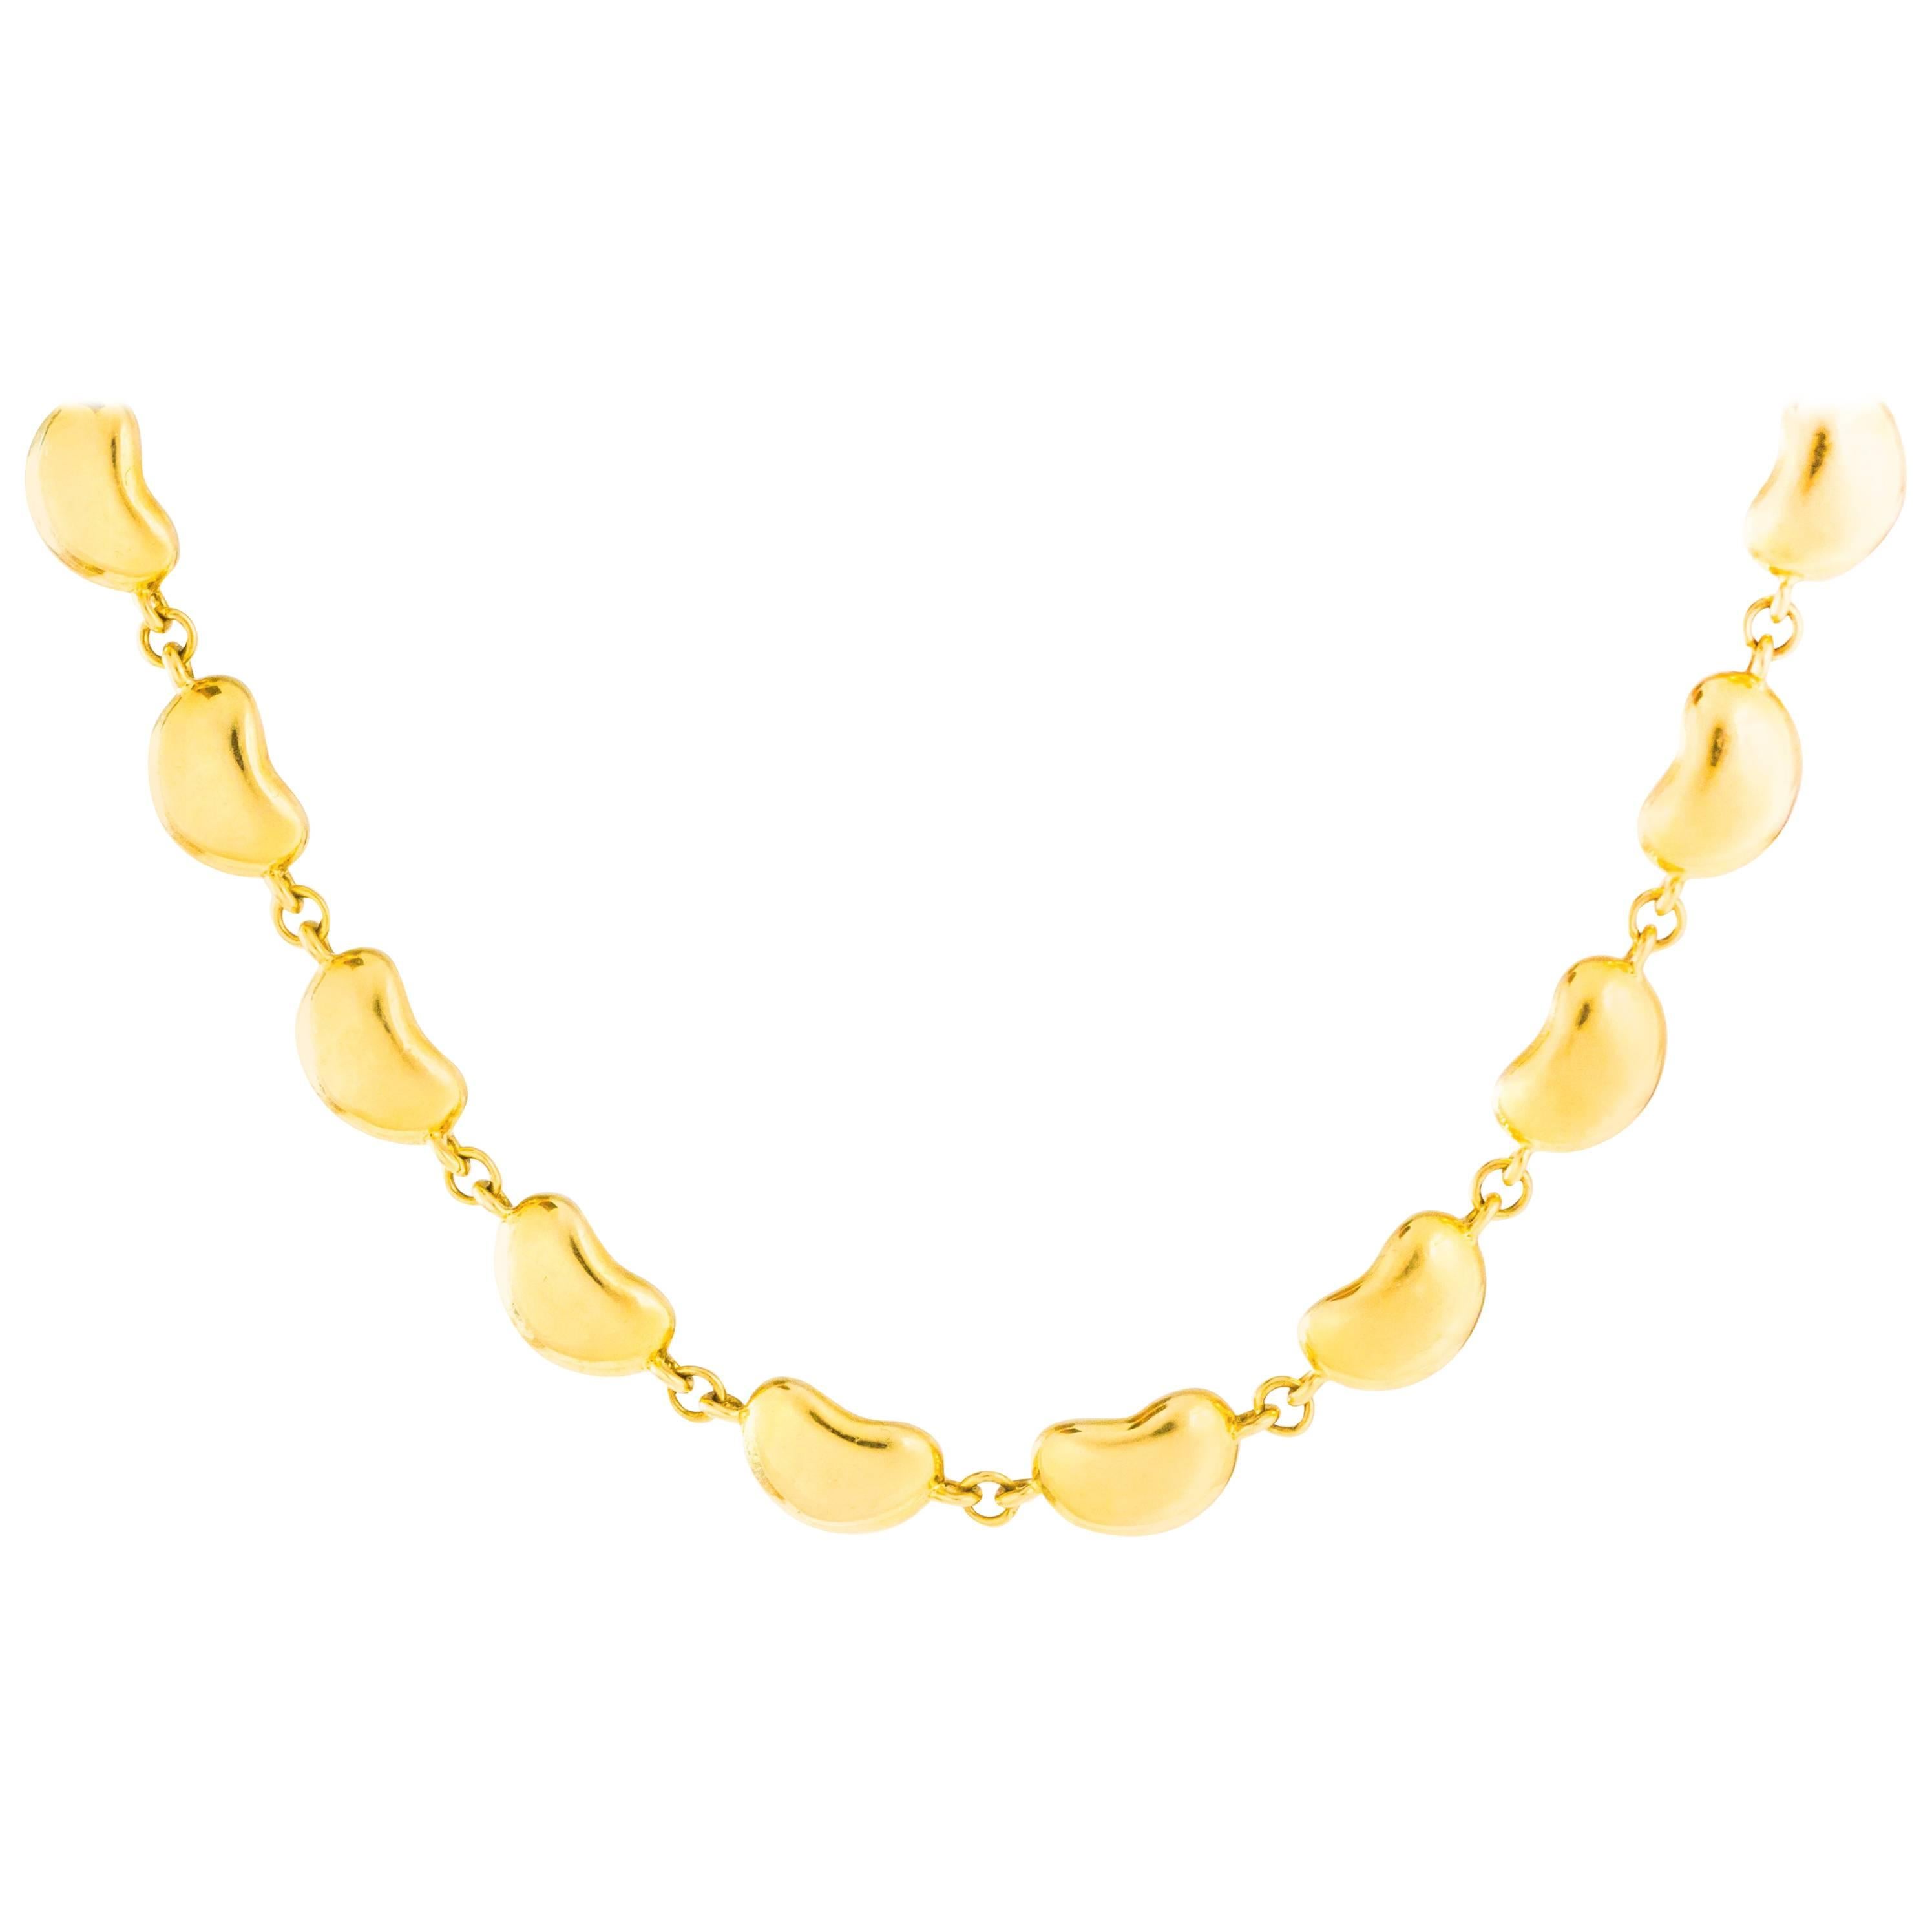 Tiffany & Co. Elsa Peretti Bean Collection 18K Gold Link Necklace